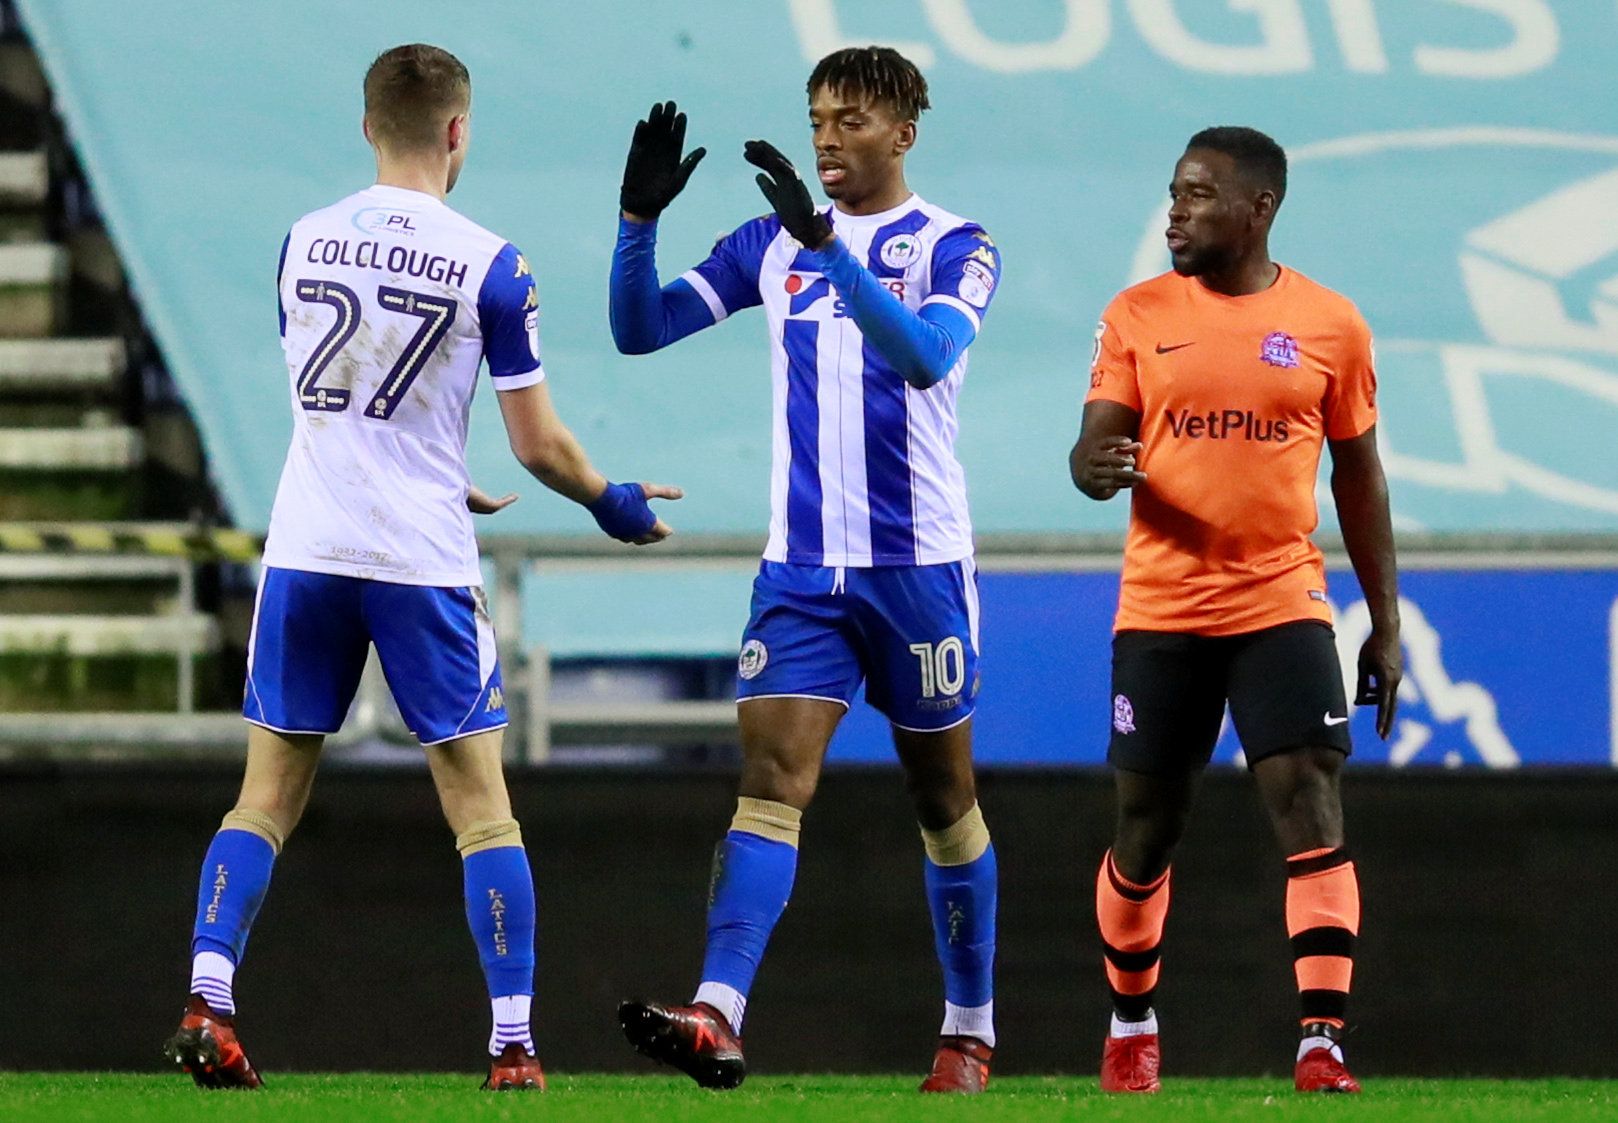 Soccer Football - FA Cup Second Round Replay - Wigan Athletic vs AFC Fylde - DW Stadium, Wigan, Britain - December 12, 2017   Wigan Athletic's Ivan Toney celebrates scoring his sides first goal   Action Images/Jason Cairnduff